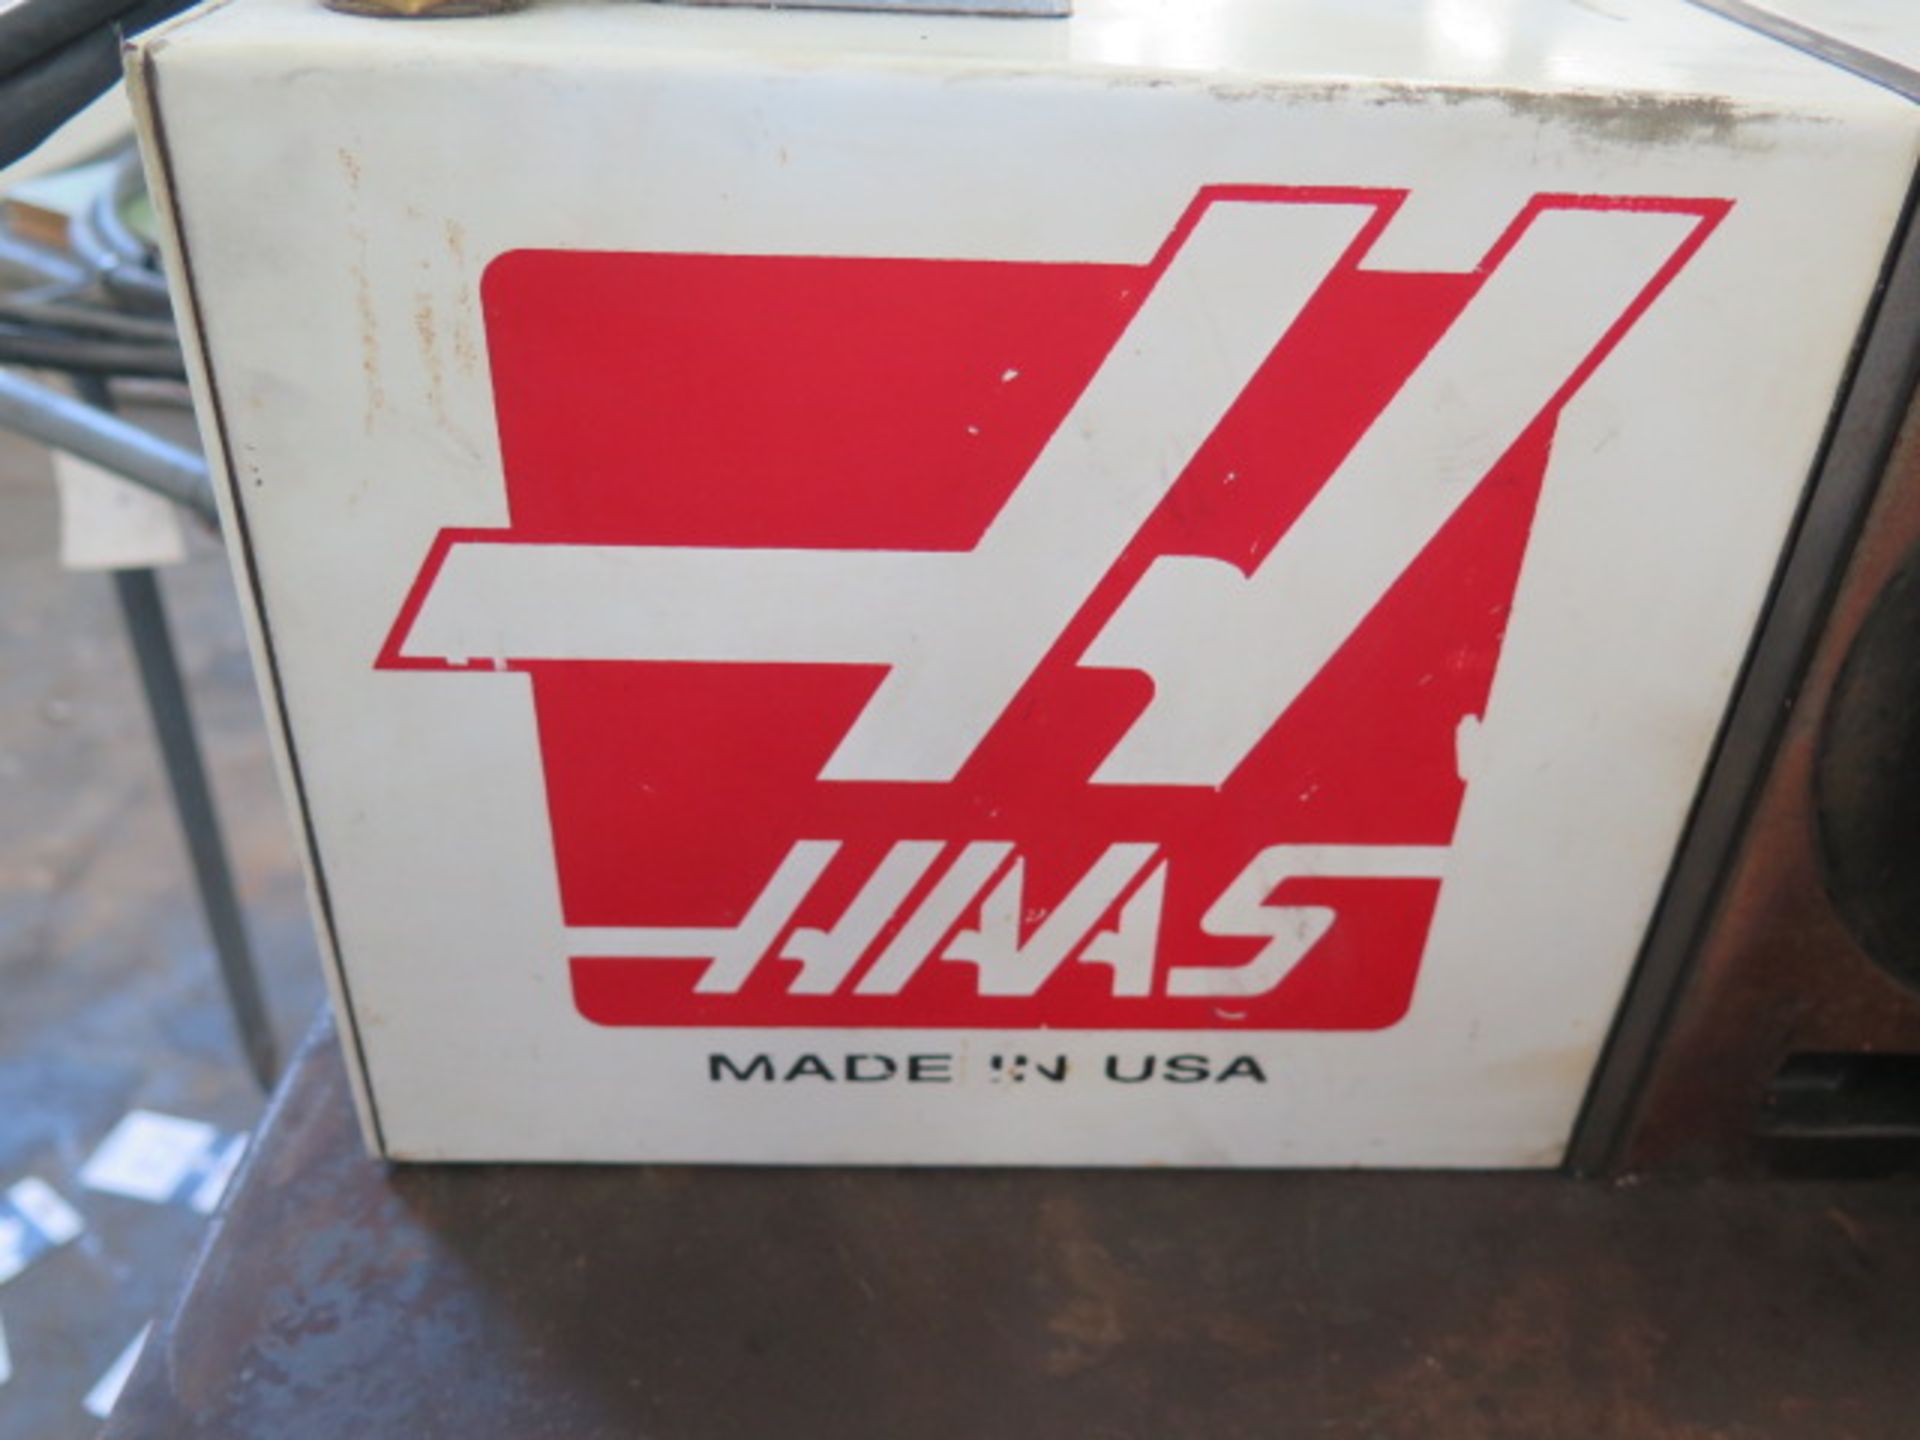 Haas HRT160 6” 4th Axis Rotary Indexer s/n 162683 - Image 5 of 8